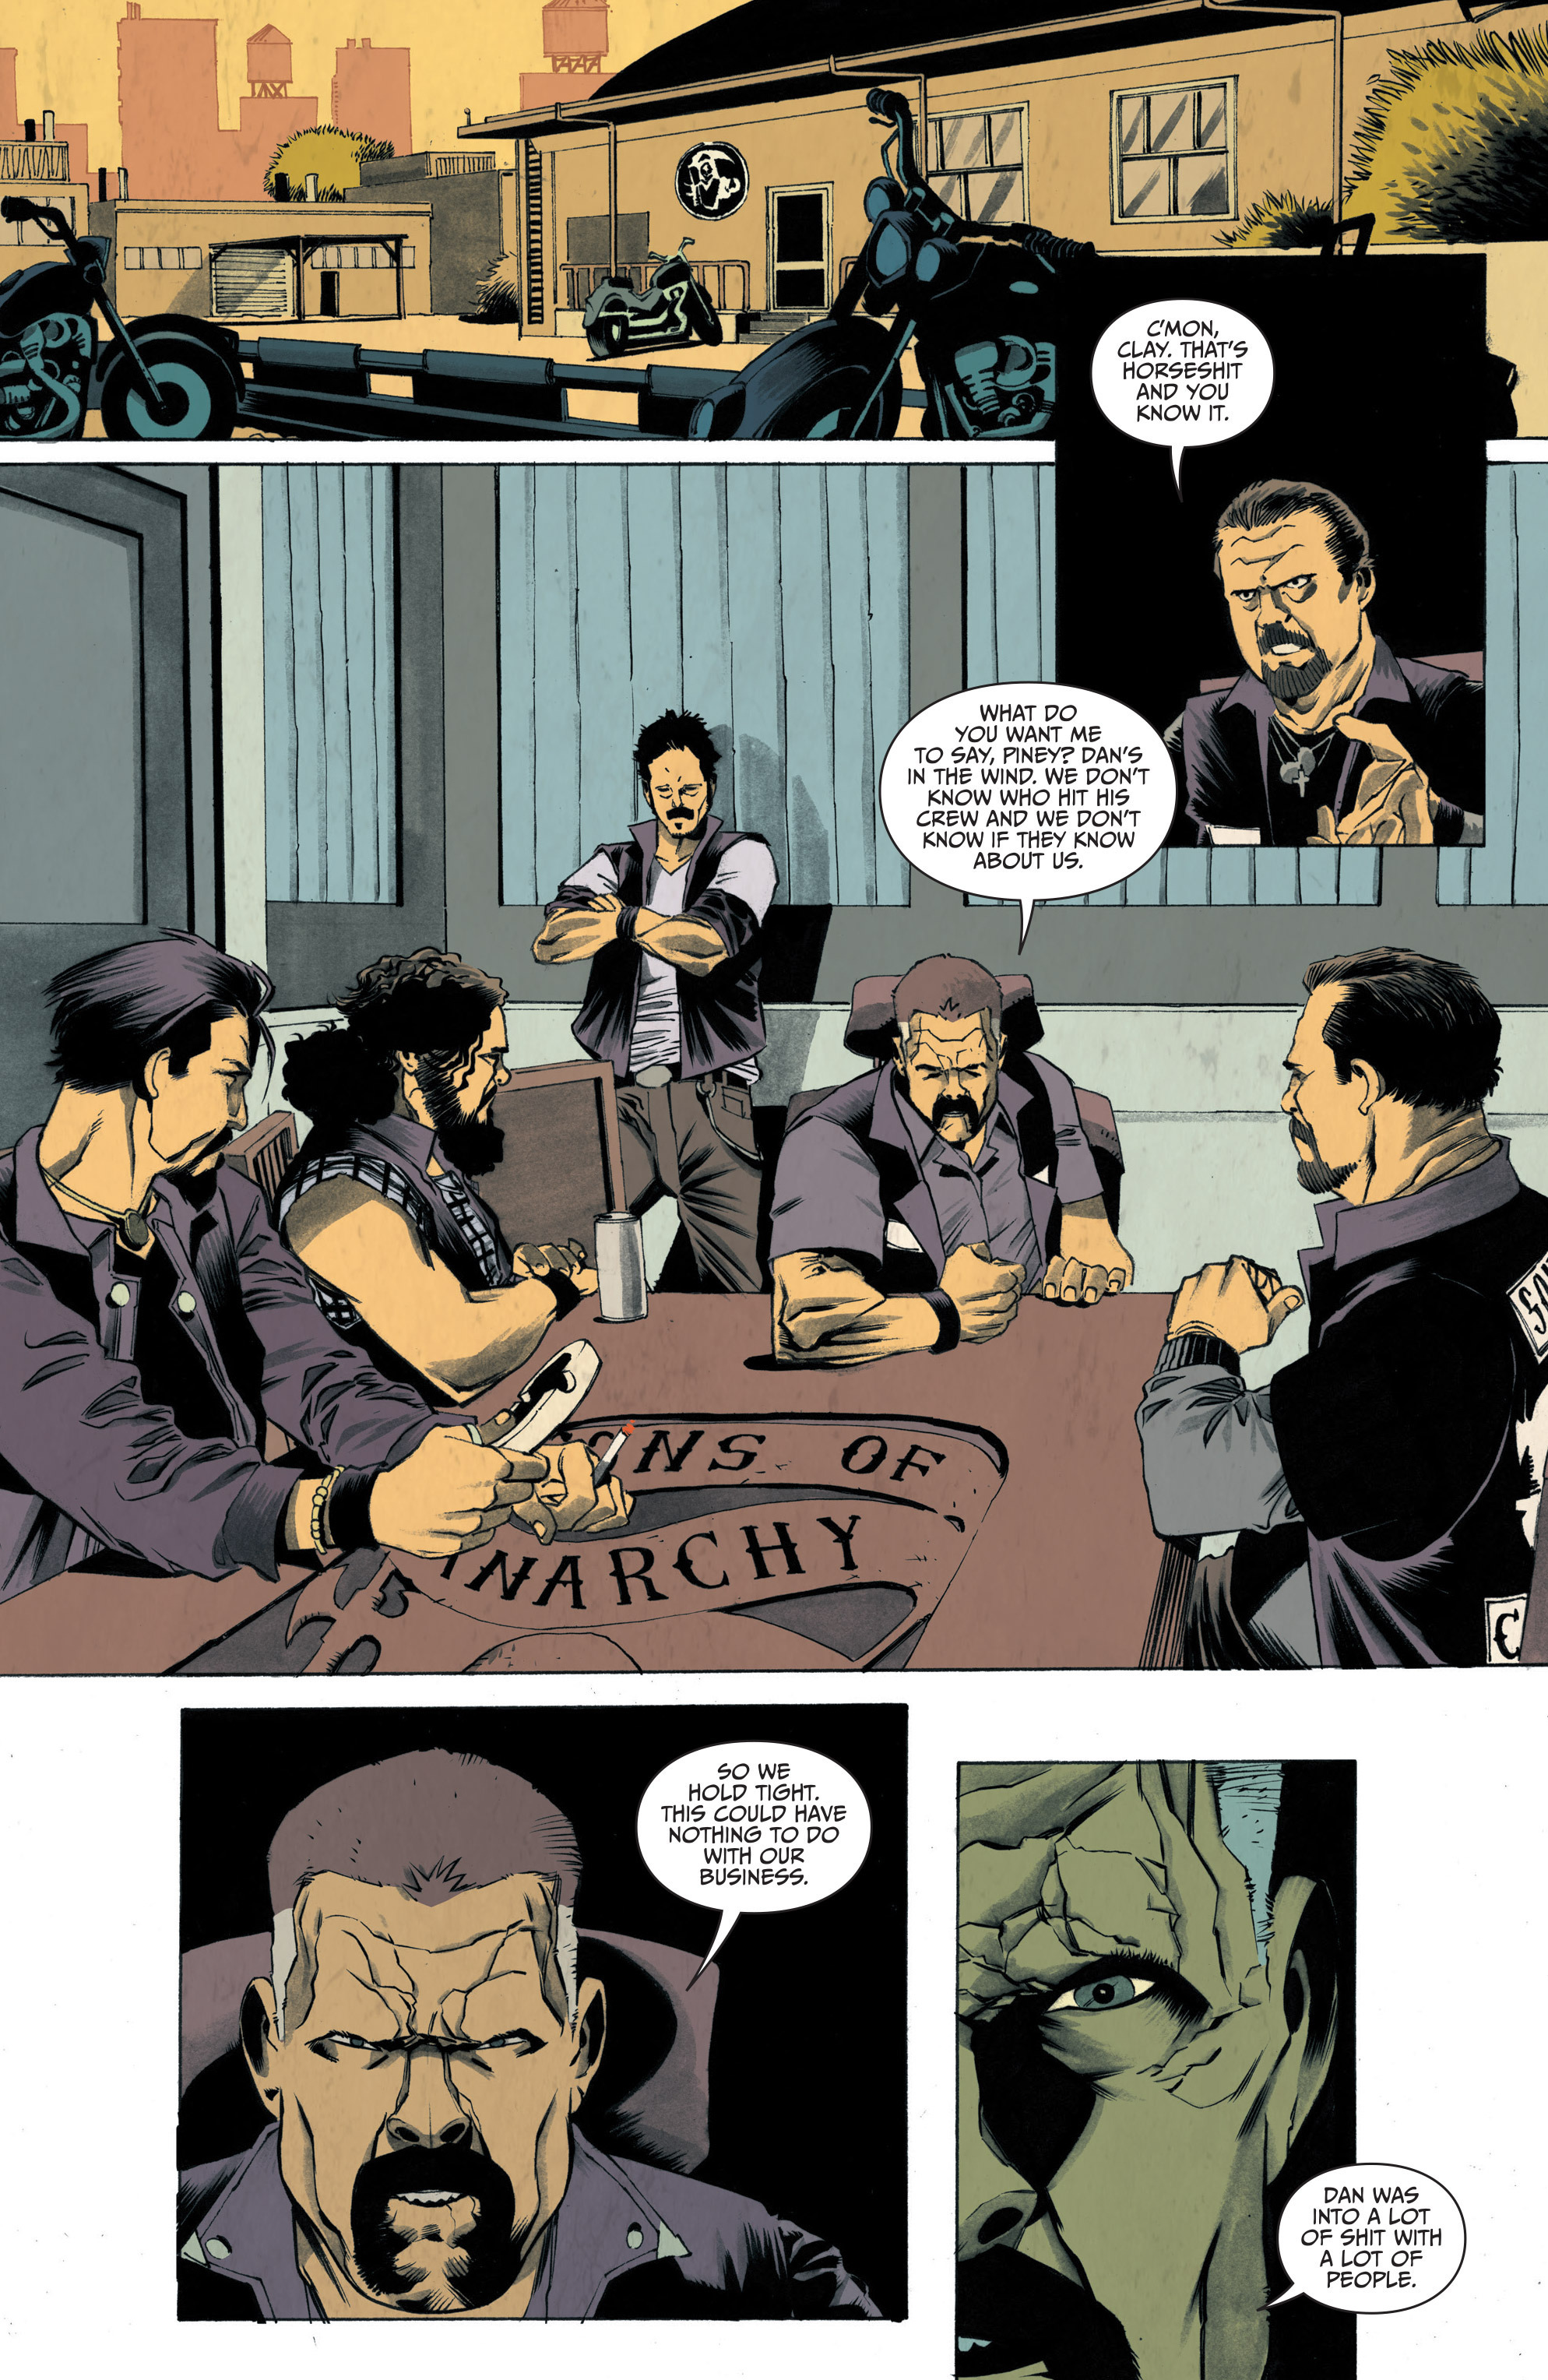 Sons of Anarchy: Redwood Original (2016-): Chapter 3 - Page 3